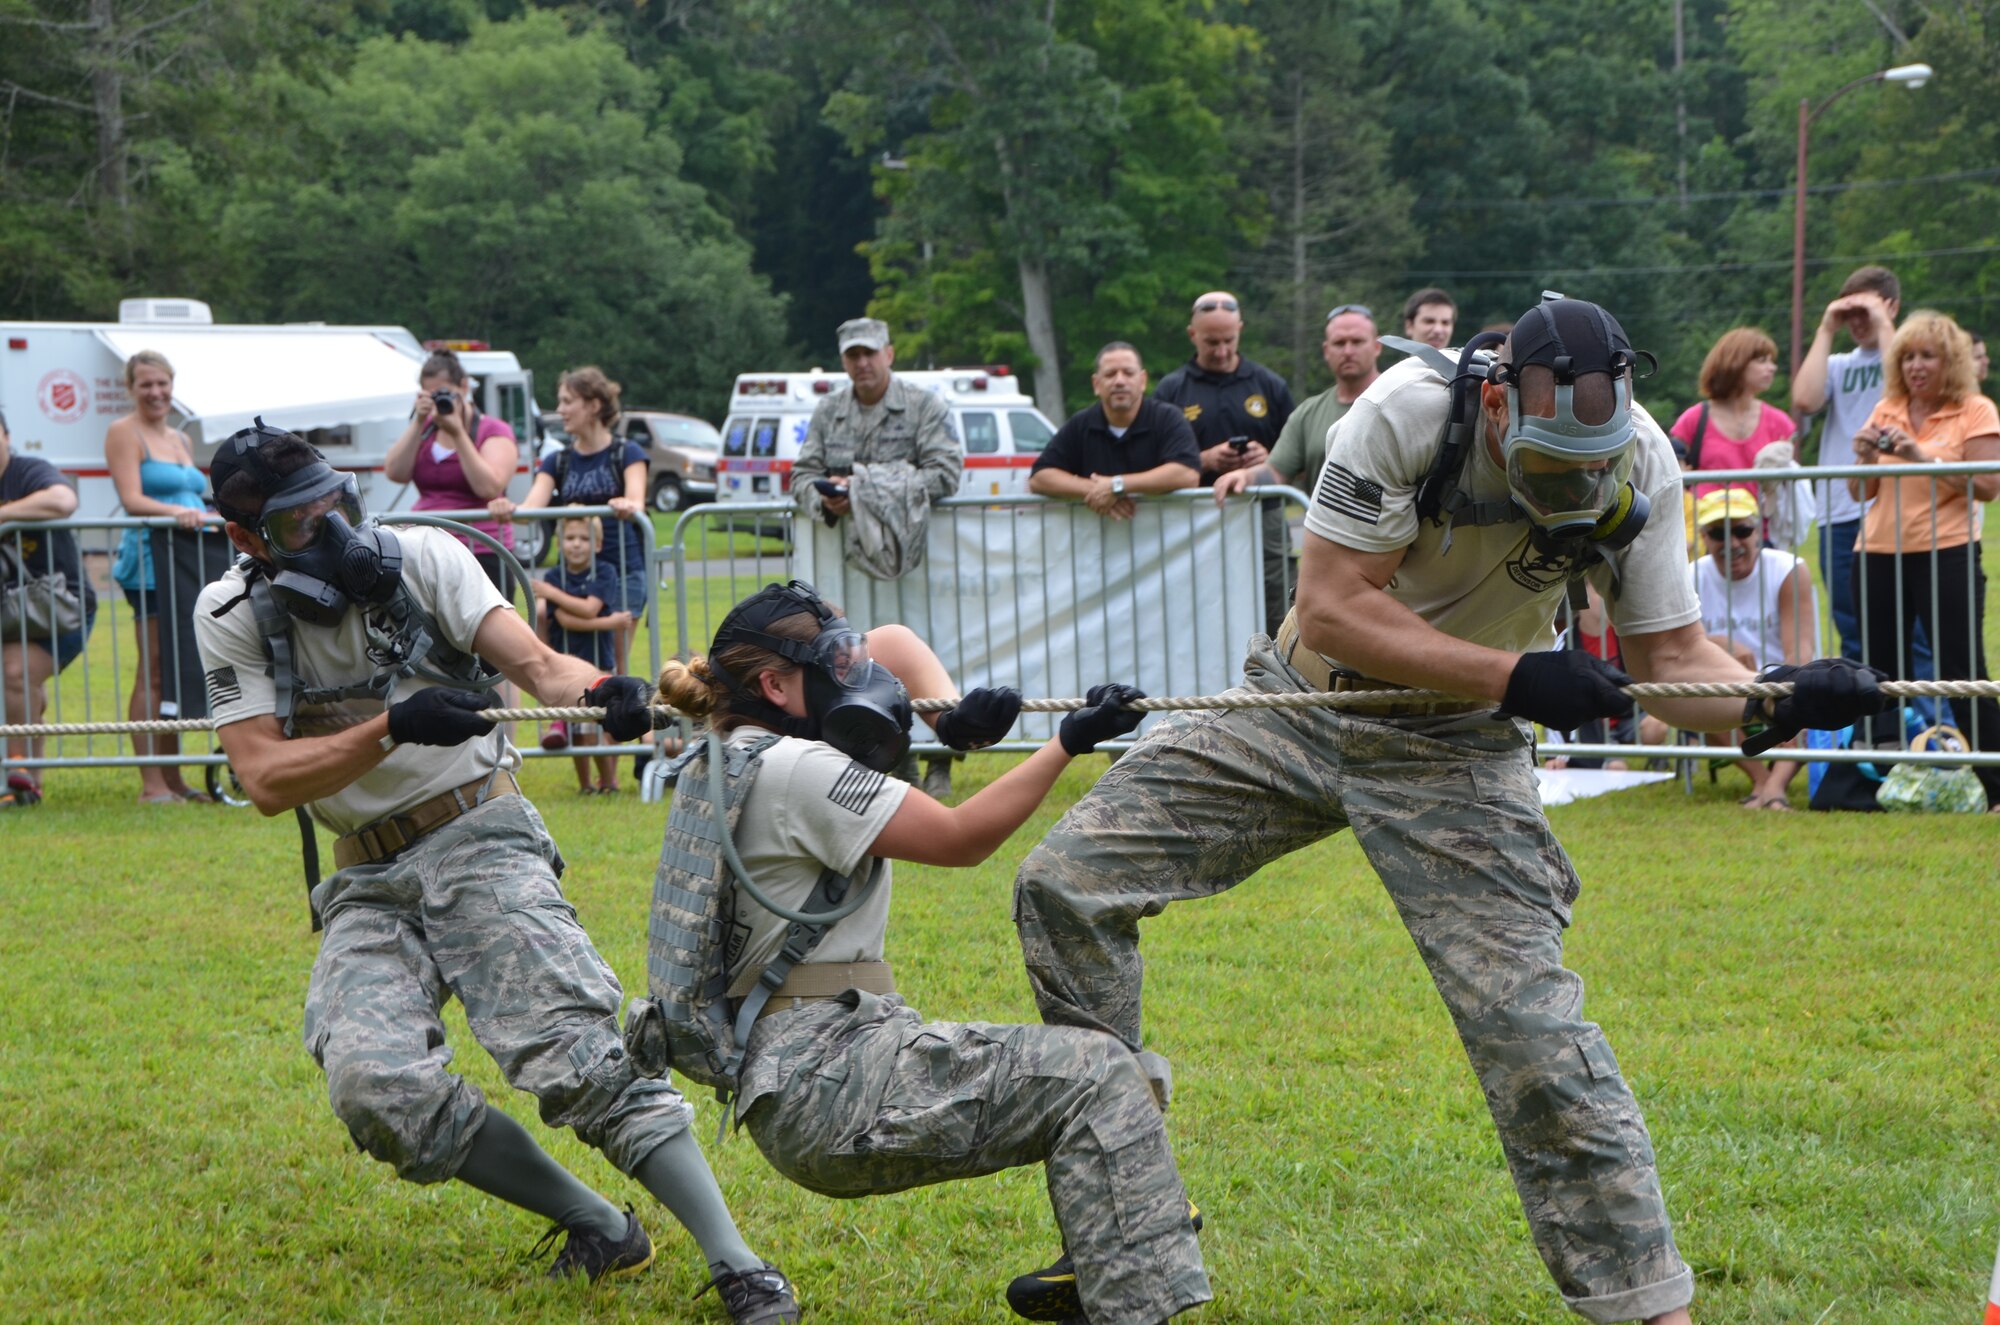 Members of the 103rd Security Forces Squadron emergency services team tug together as part of the Connecticut SWAT Challenge on Aug. 22, 2013, at the West Hartford Reservoir, West Hartford, Conn. The Connecticut Air National Guard team grabbed eighth place overall, besting 20 other regional teams. This was just one of many physically grueling obstacles competitors faced.  (U.S. Air National Guard Photo by Maj. Bryon Turner)